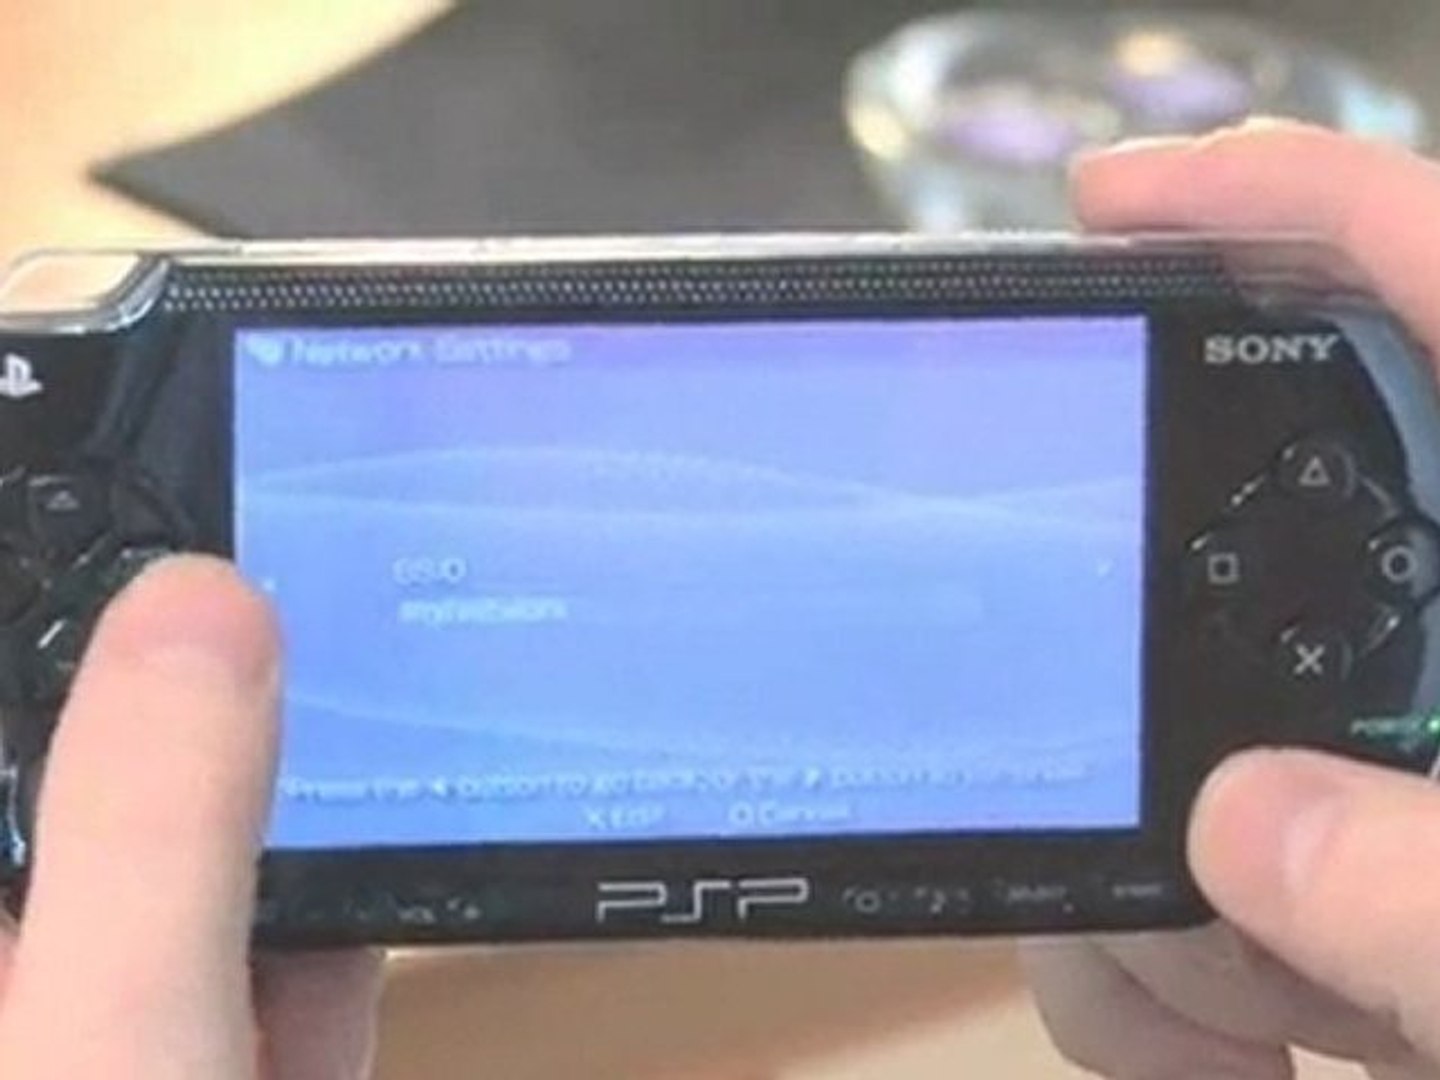 How To Set Up A Playstation 3 And A Playstation Portable For Remote Play -  video Dailymotion